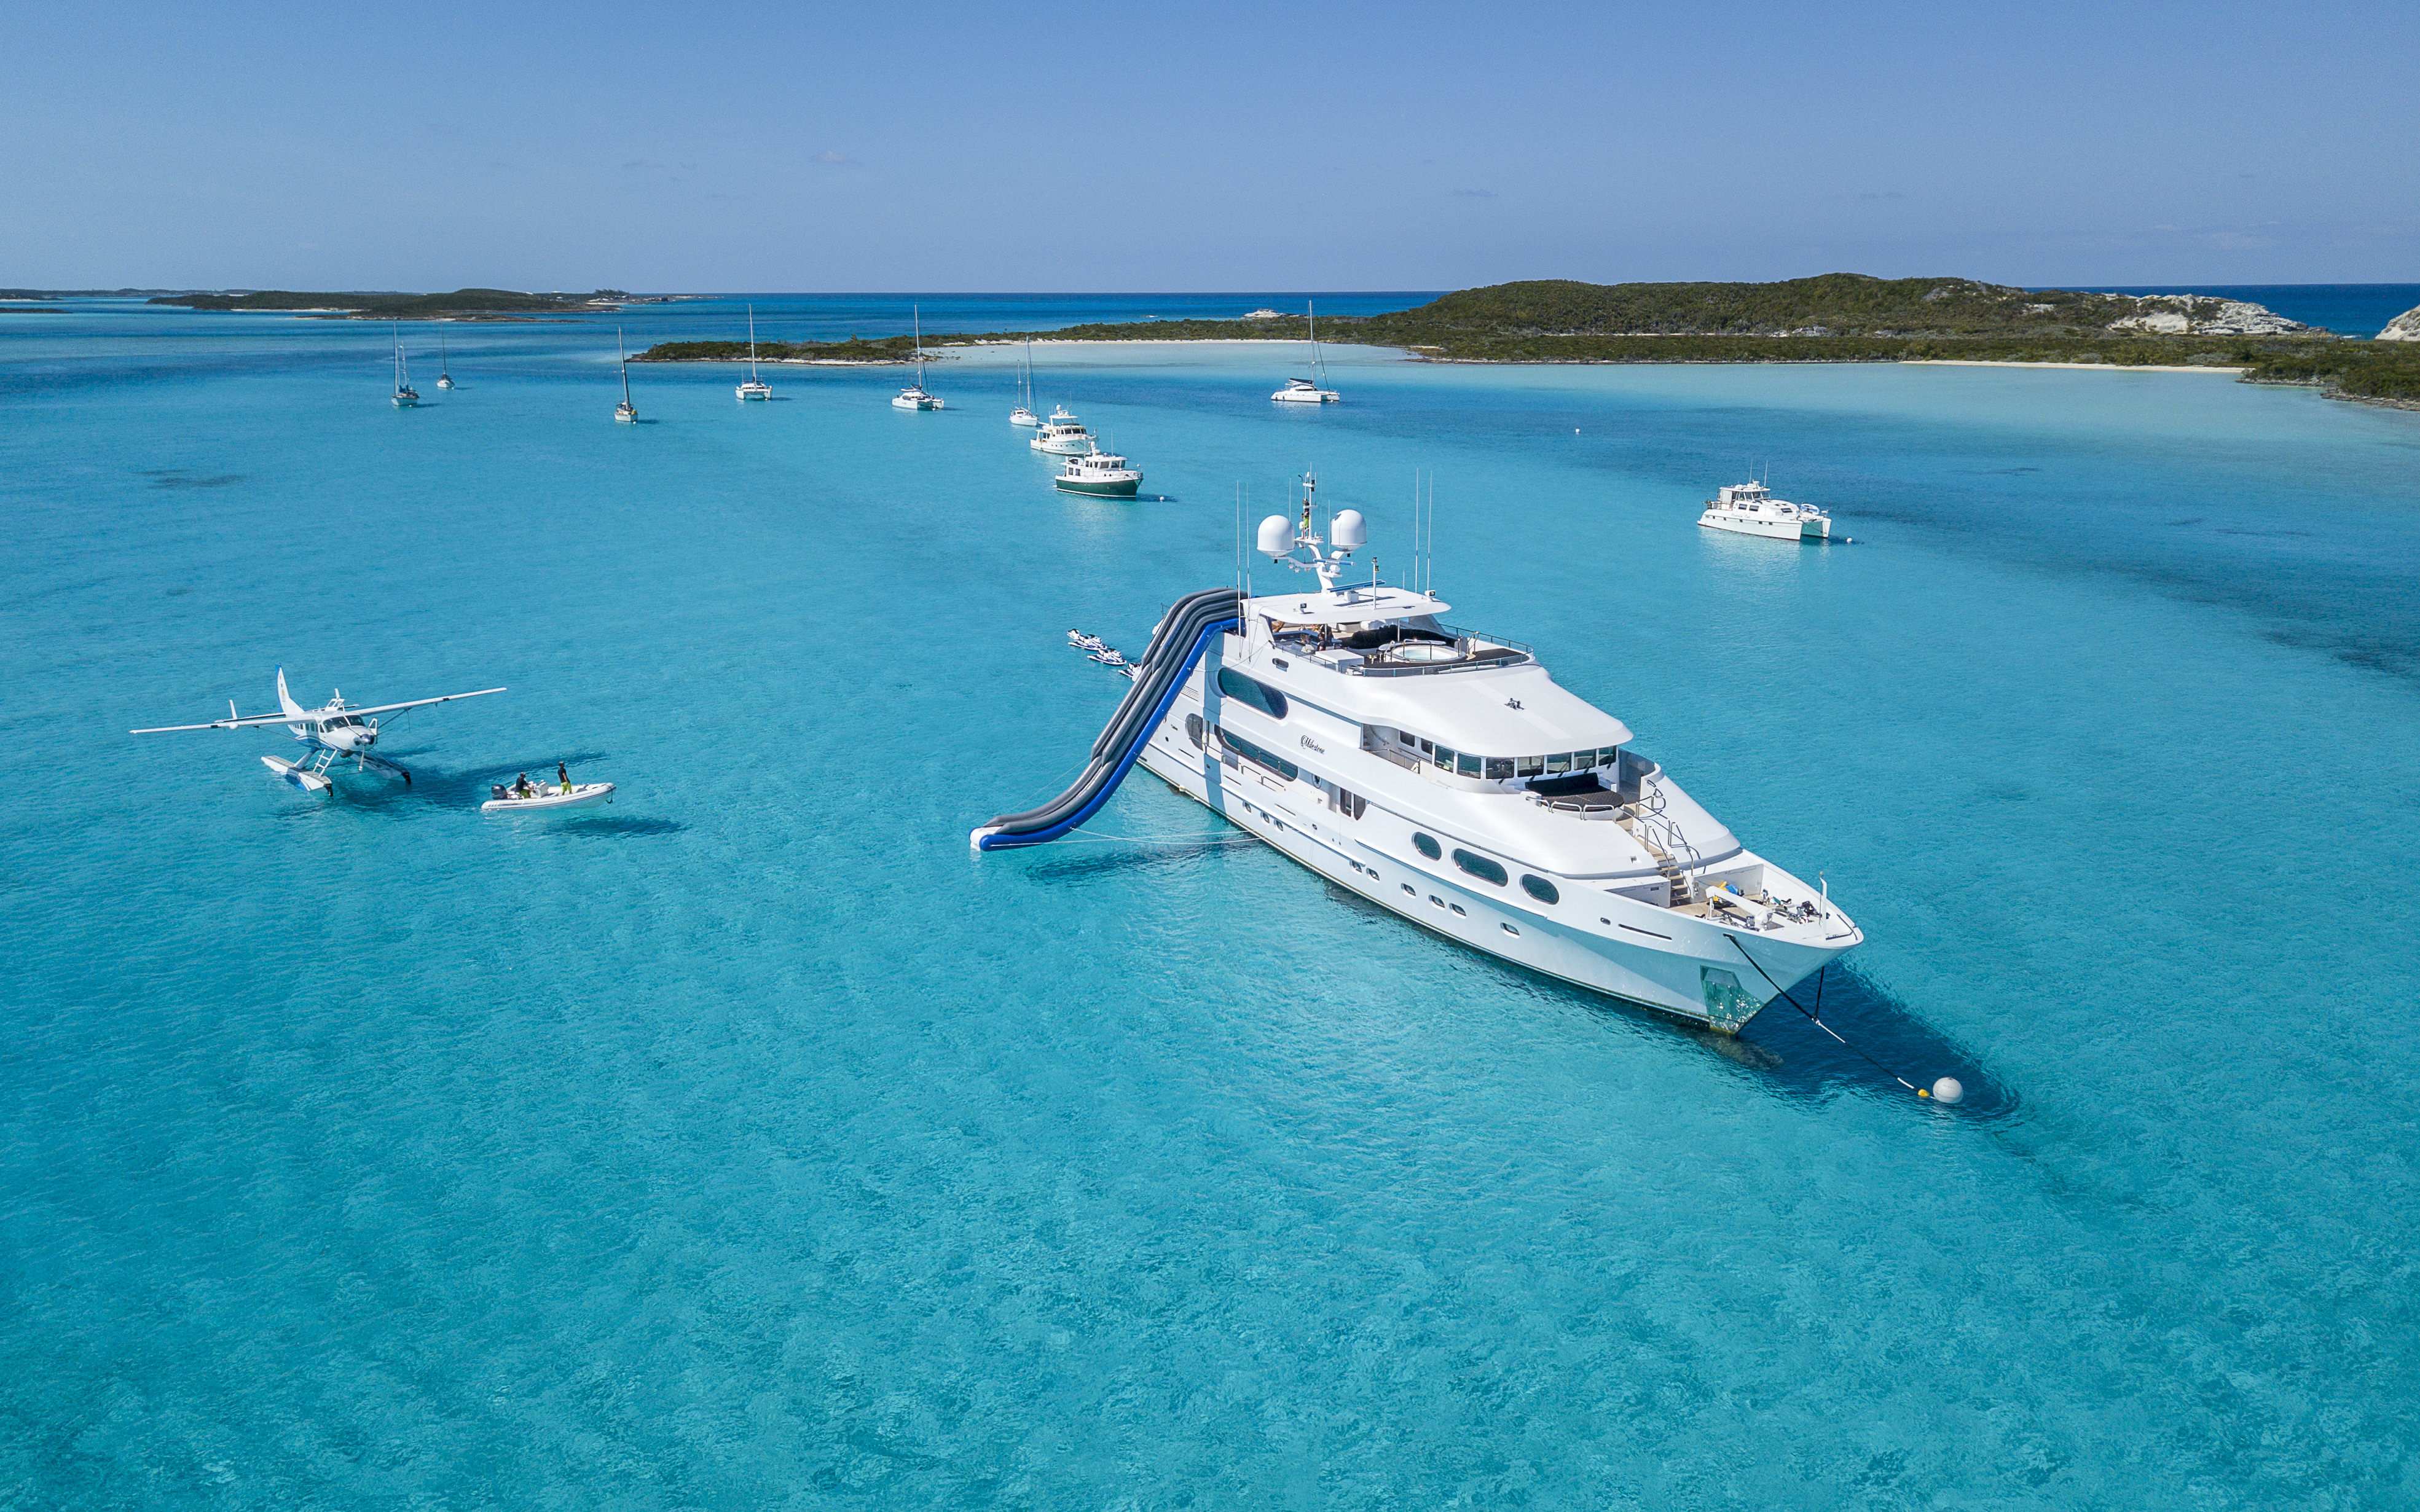 White yachts and sea plane on azure blue waters near islands in the Bahamas.